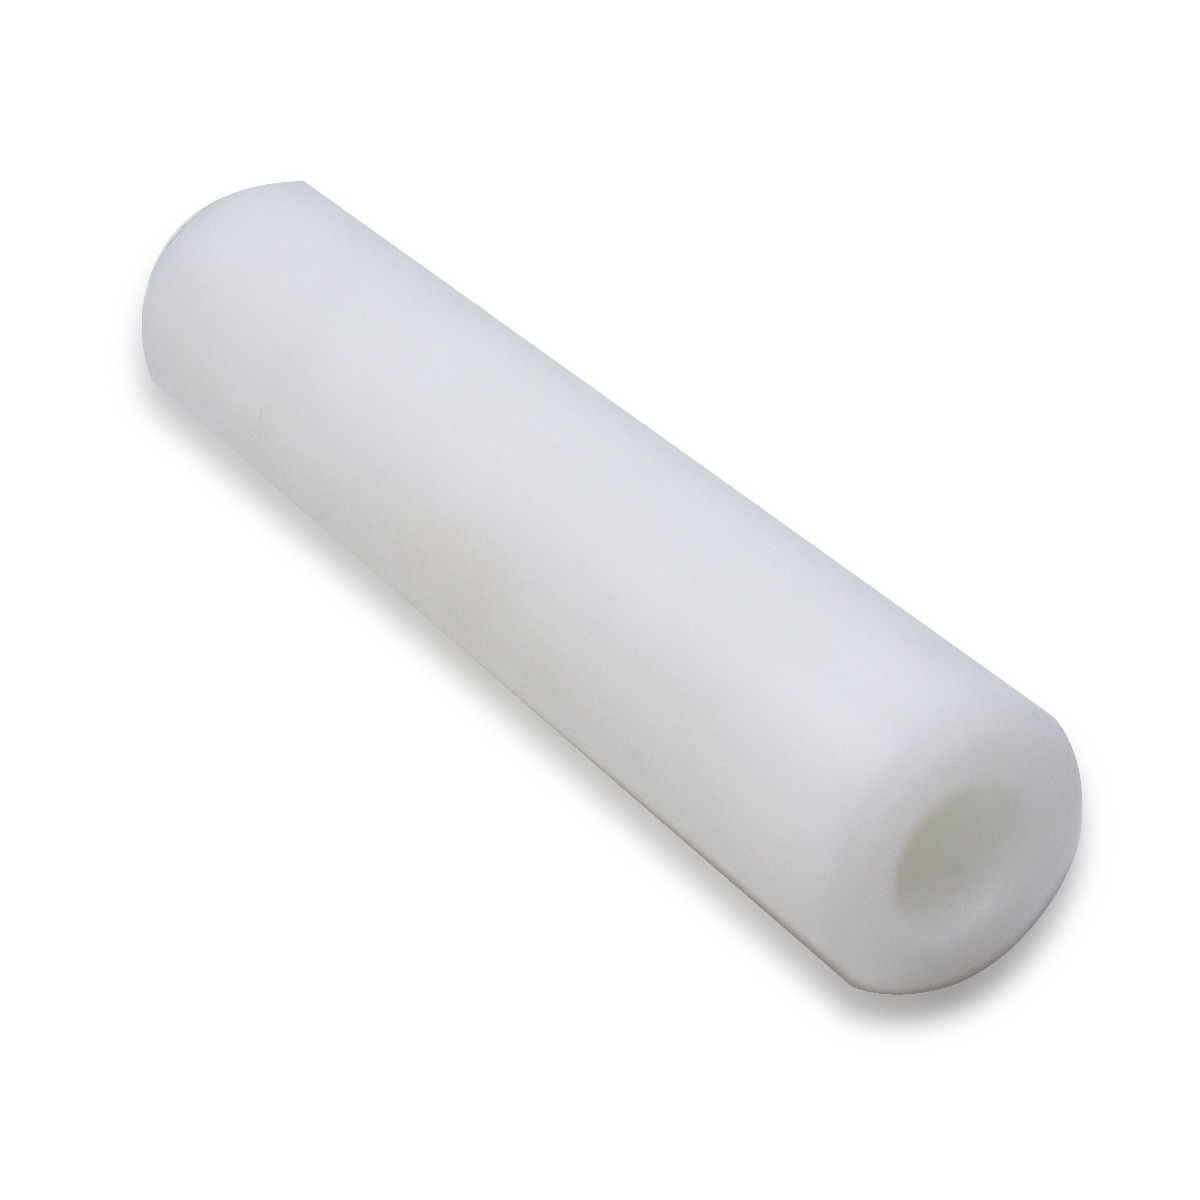 BVC Replacement Pin Stop, White Nylon Roller, 1" x 200mm